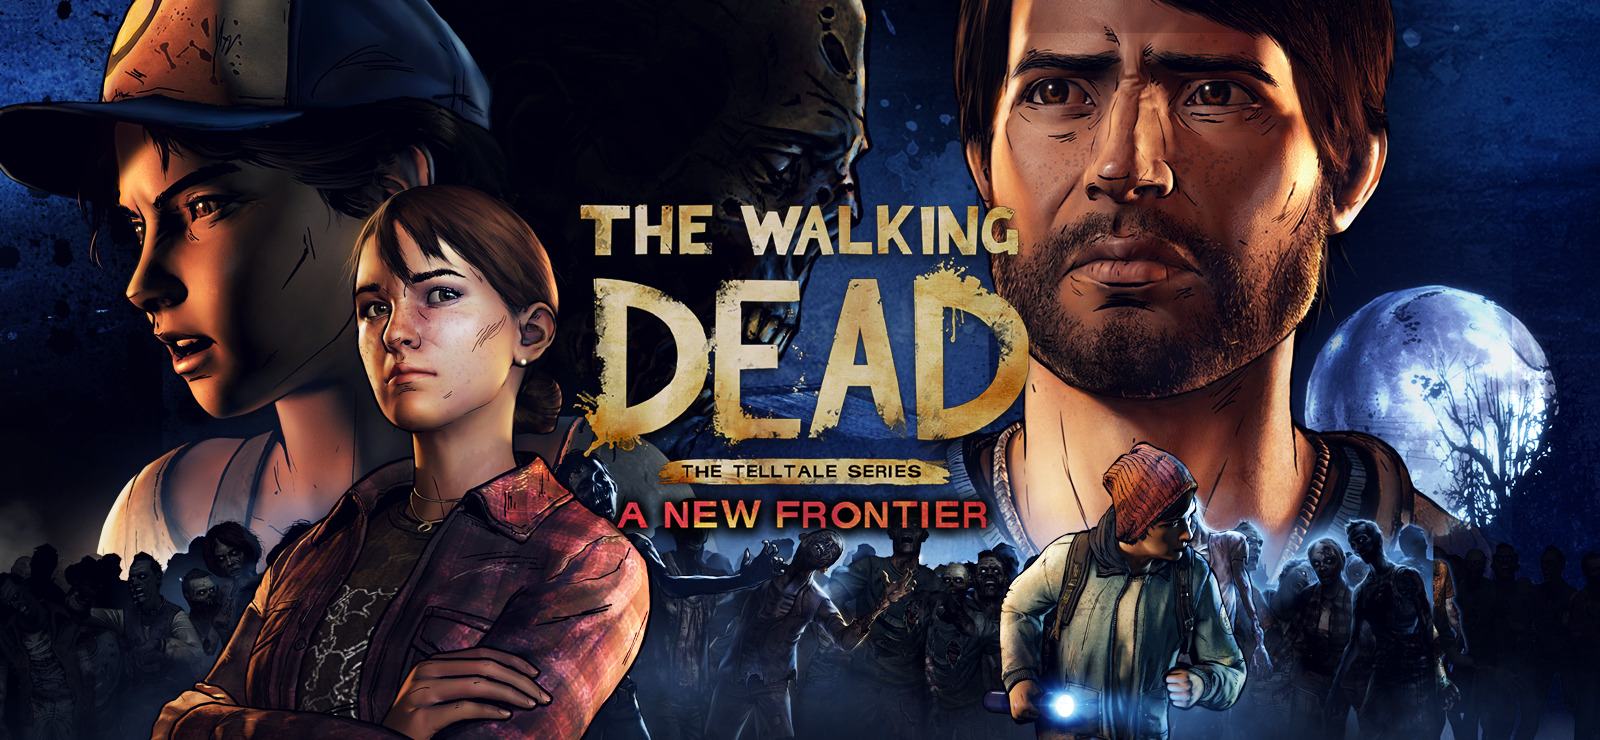 will there be a new walking dead game